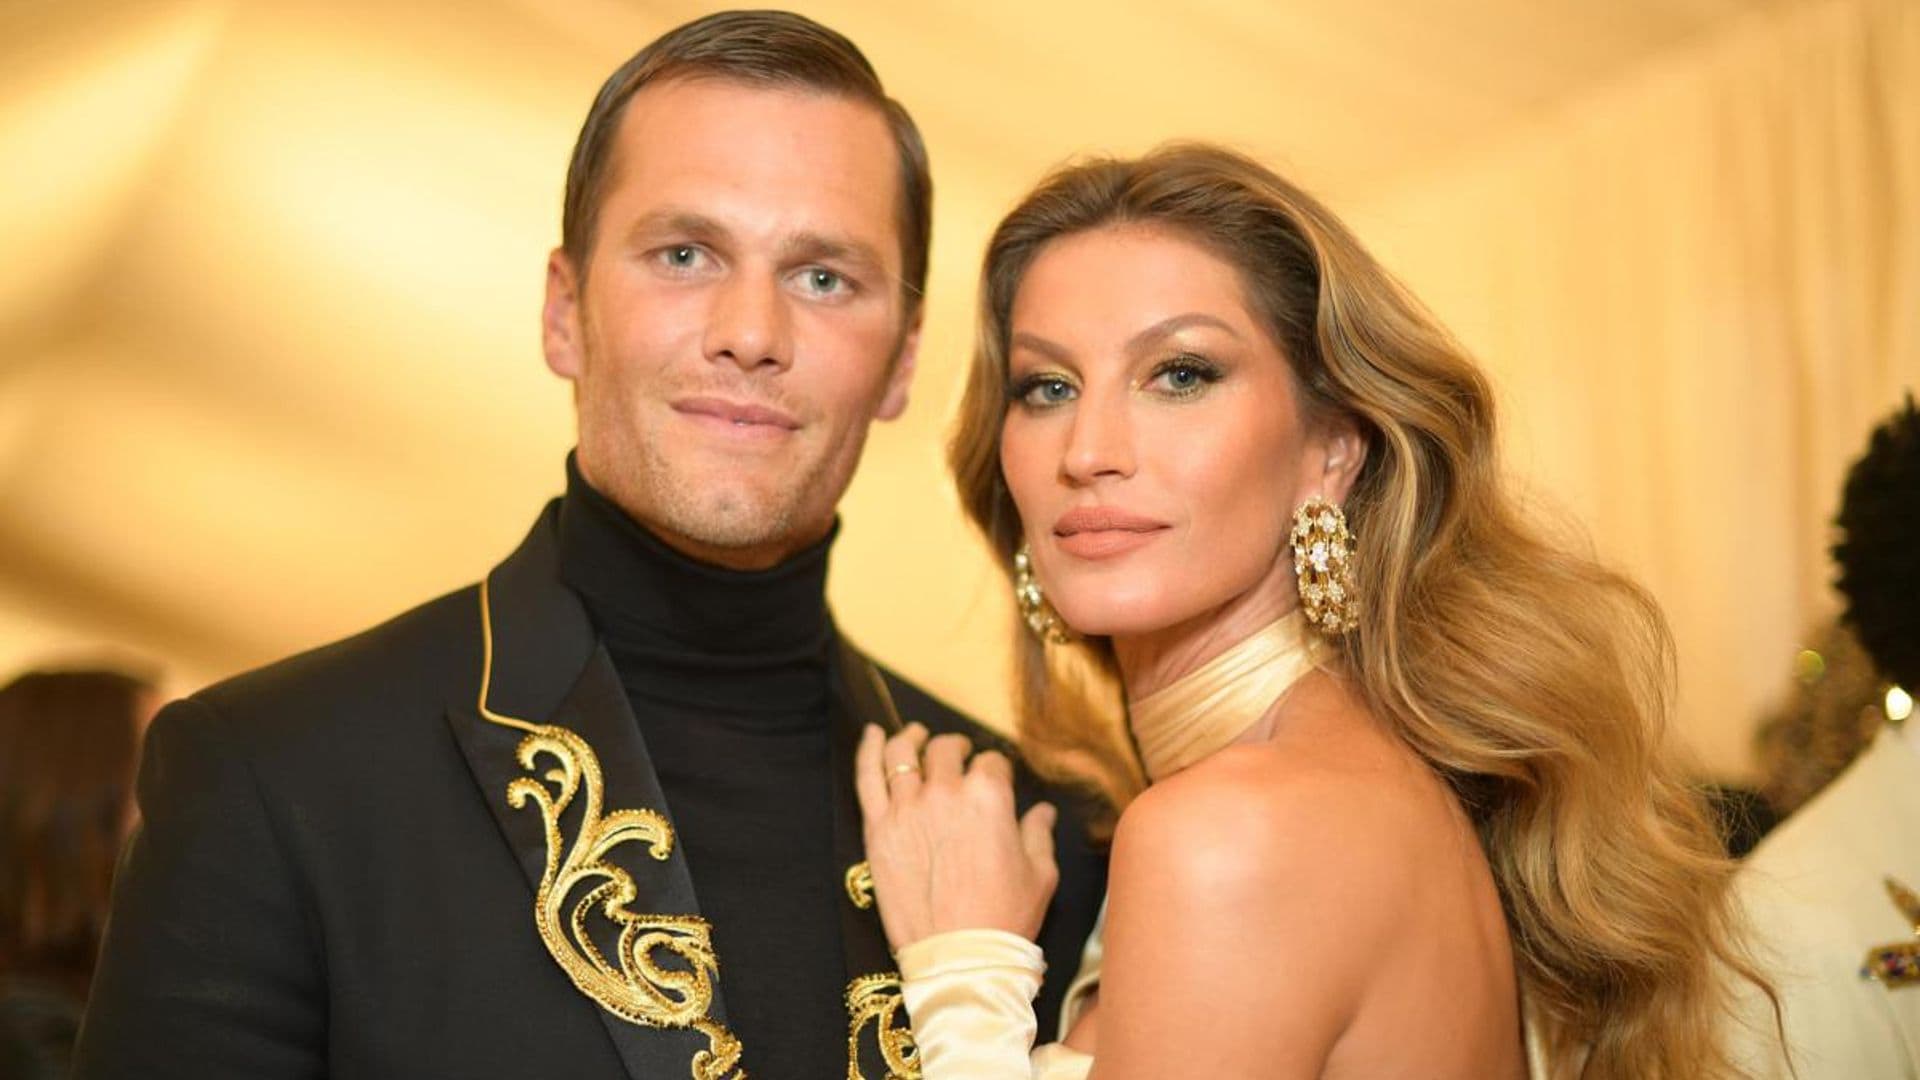 Tom Brady is having a hard time thinking about starting a life away from Gisele Bündchen